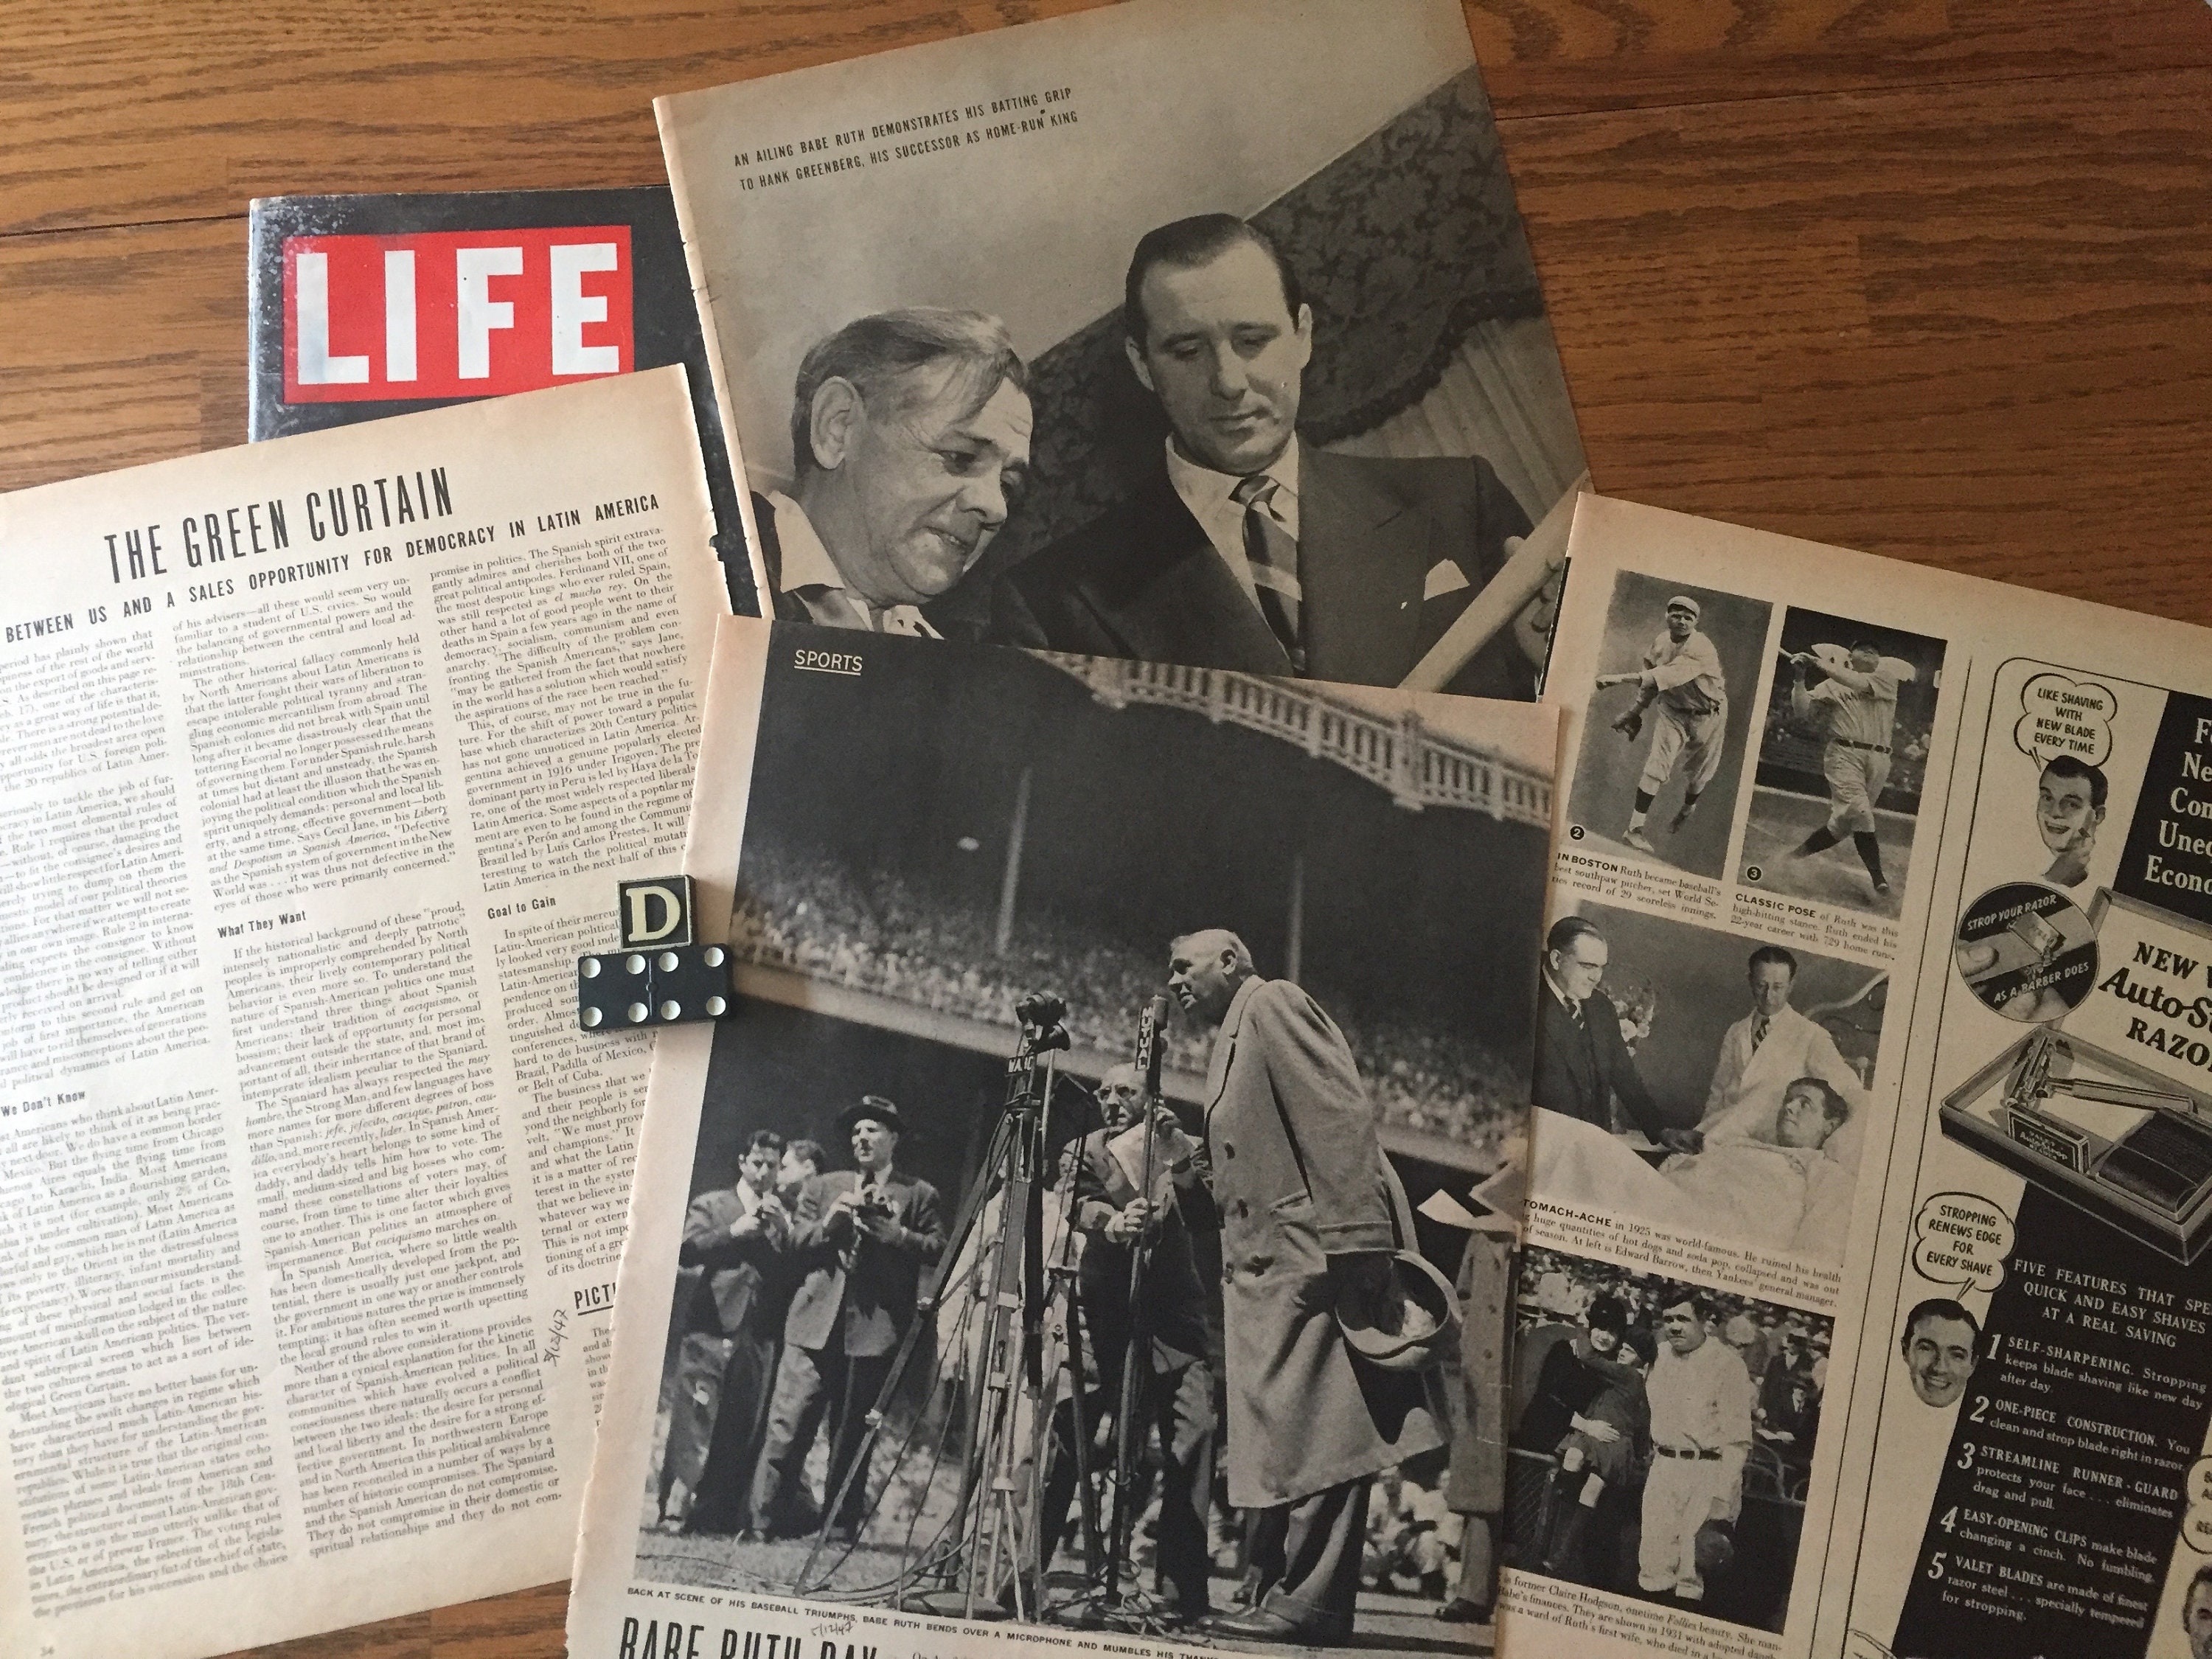 Babe Ruth and his last days, 2 articles from 1940s LIFE Magazine issues  re., Babe Ruth Day at Yankee Stadium, The House that Ruth Built D-8